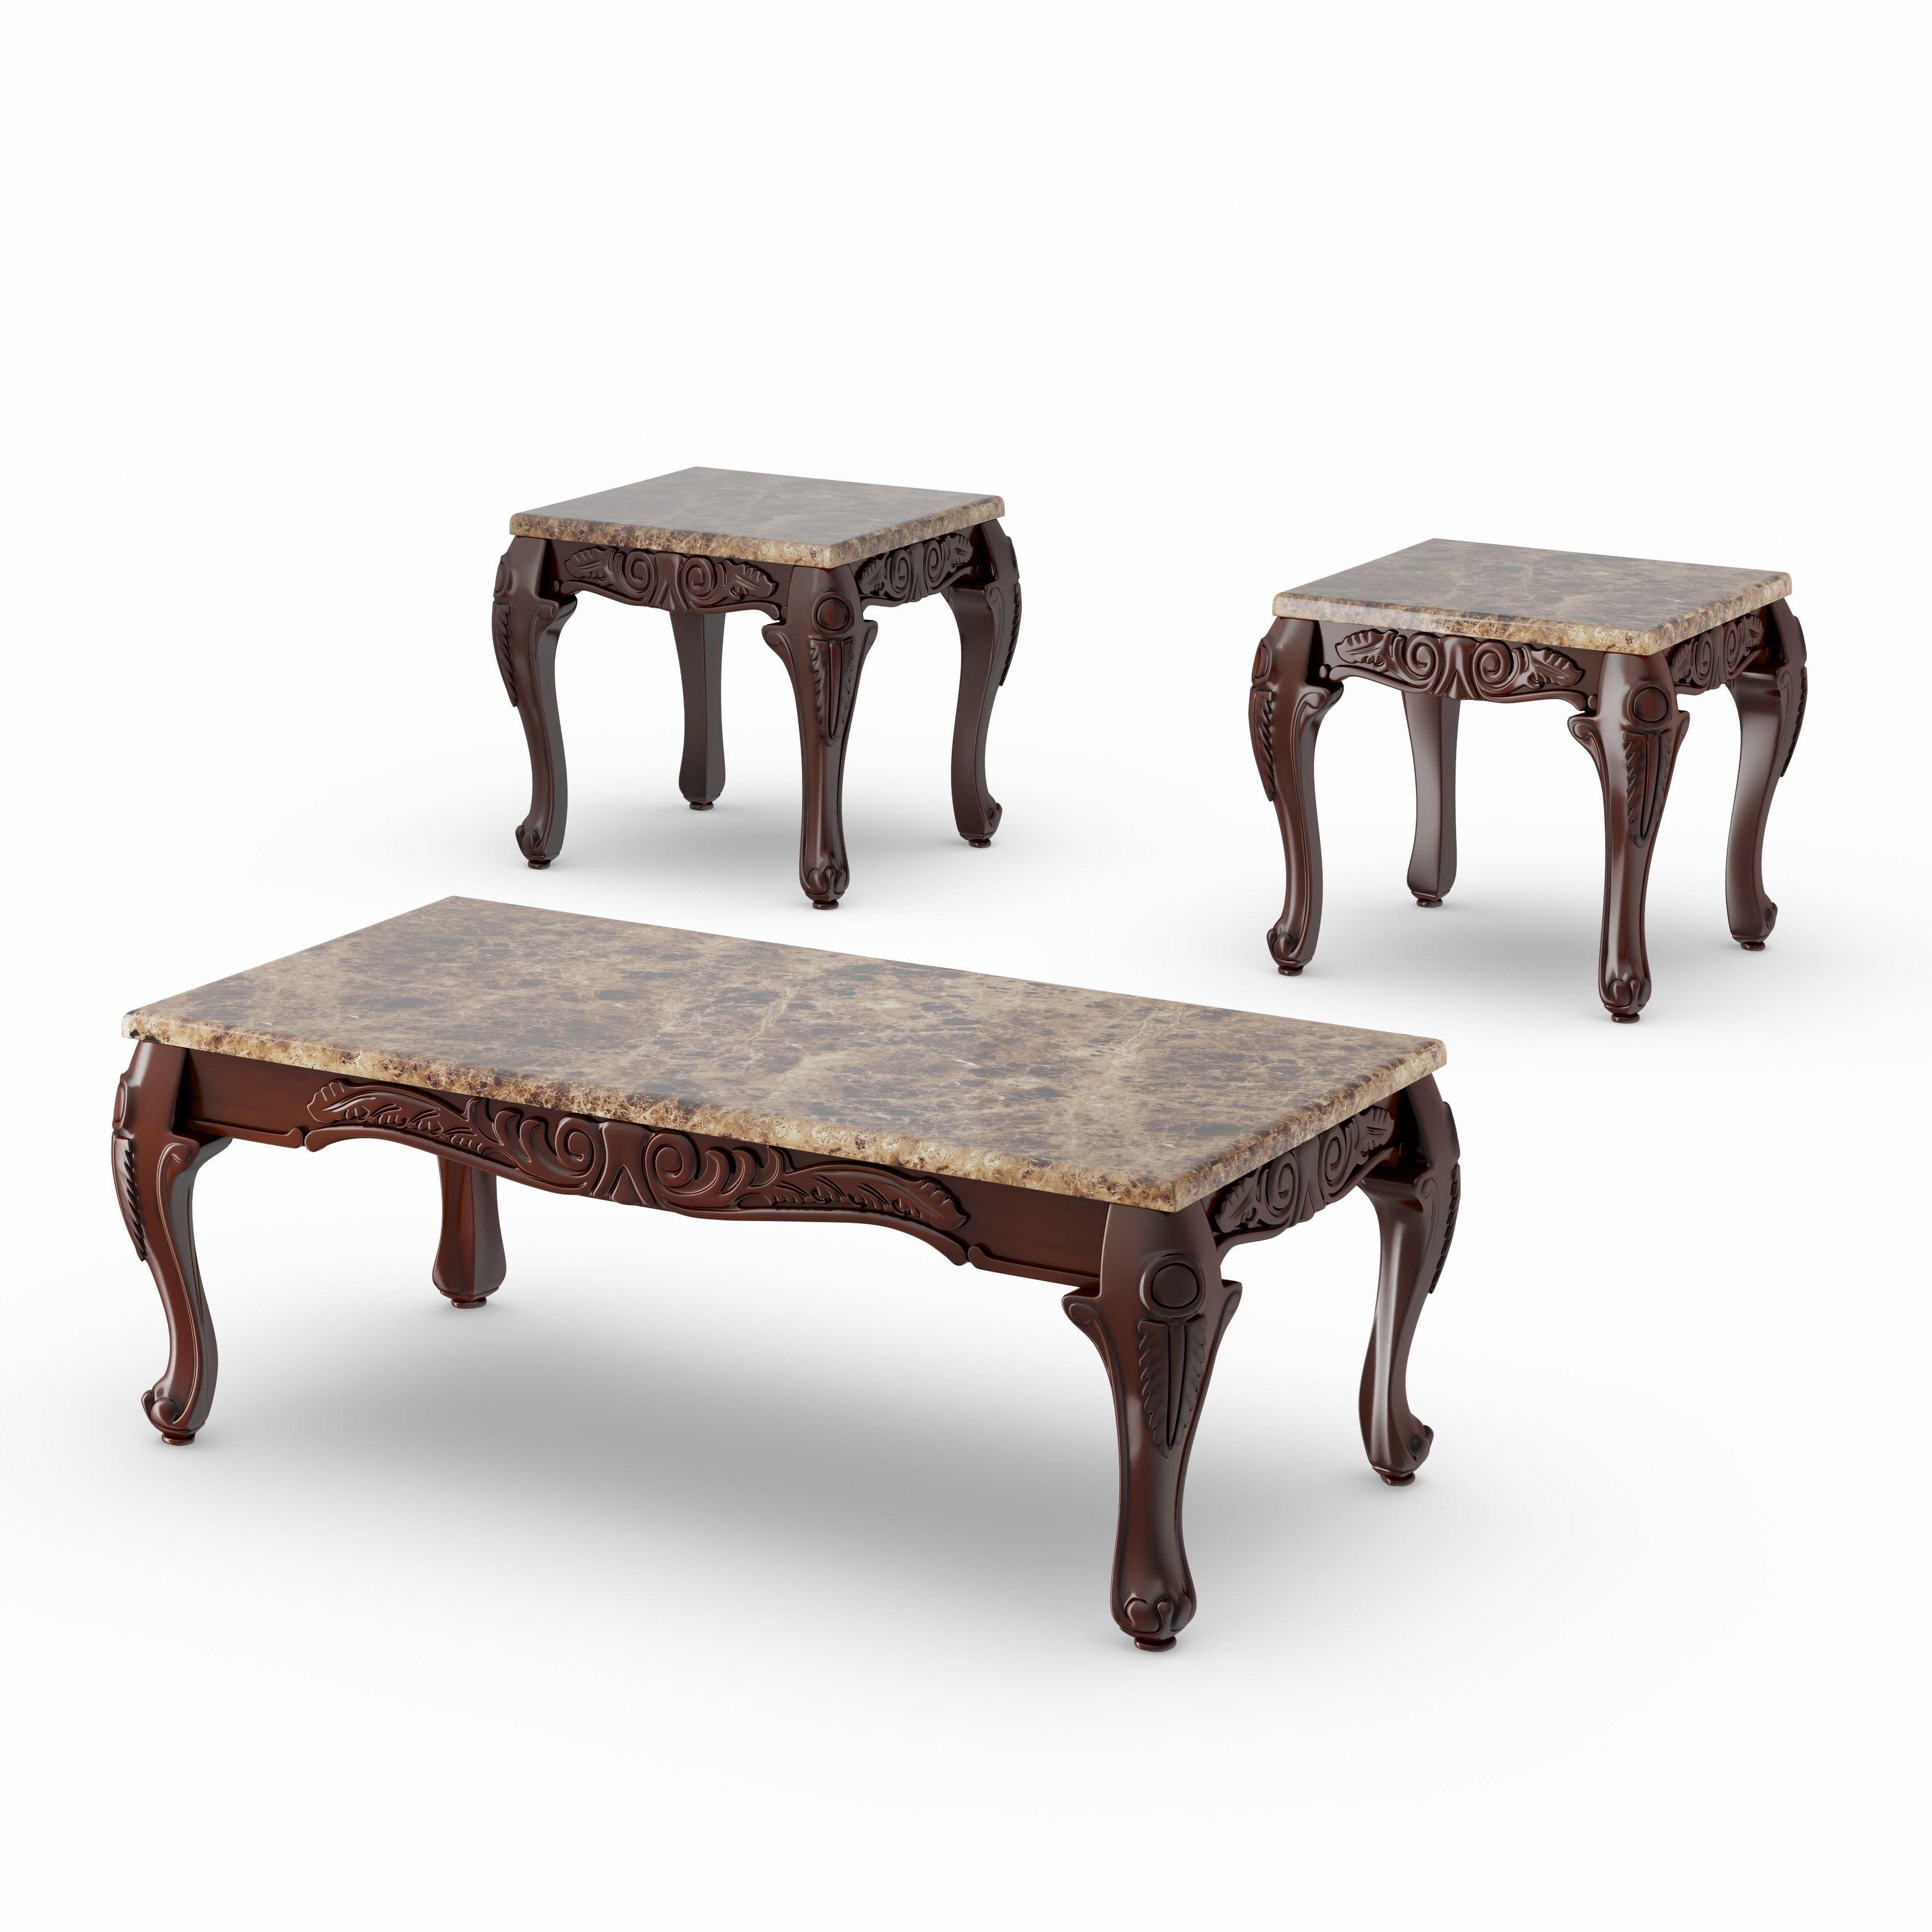 Gracewood Hollow Mckinley Traditional 3 Piece Accent Table Set Throughout 2020 Gracewood Hollow Fishta Antique Brass Metal Glass 3 Piece Tables (View 10 of 20)